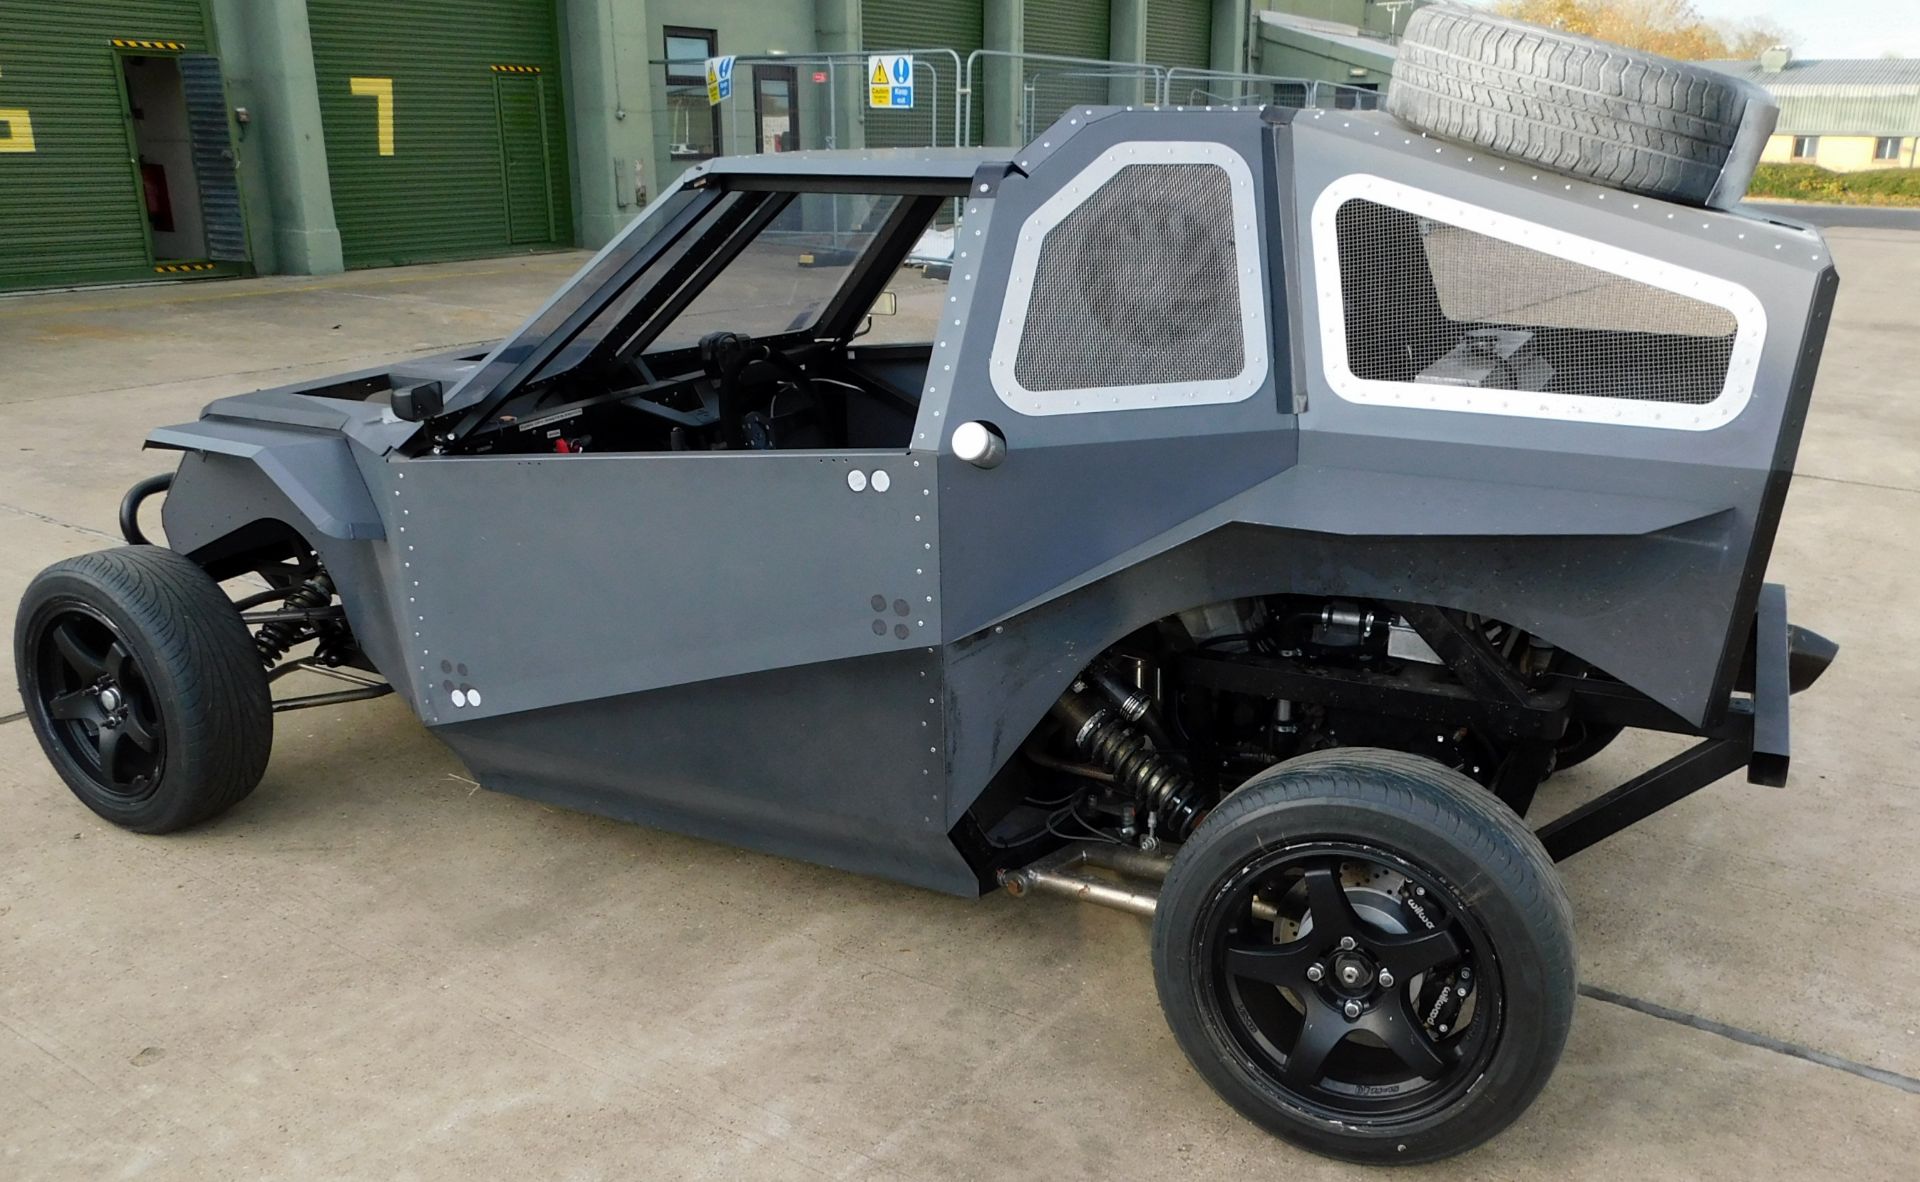 Bespoke Off-Road Buggy, Rear Wheel Drive, Chassis Number FL0001 , Suzuki Hyabusa 1300cc 4 Cylinder - Image 3 of 7